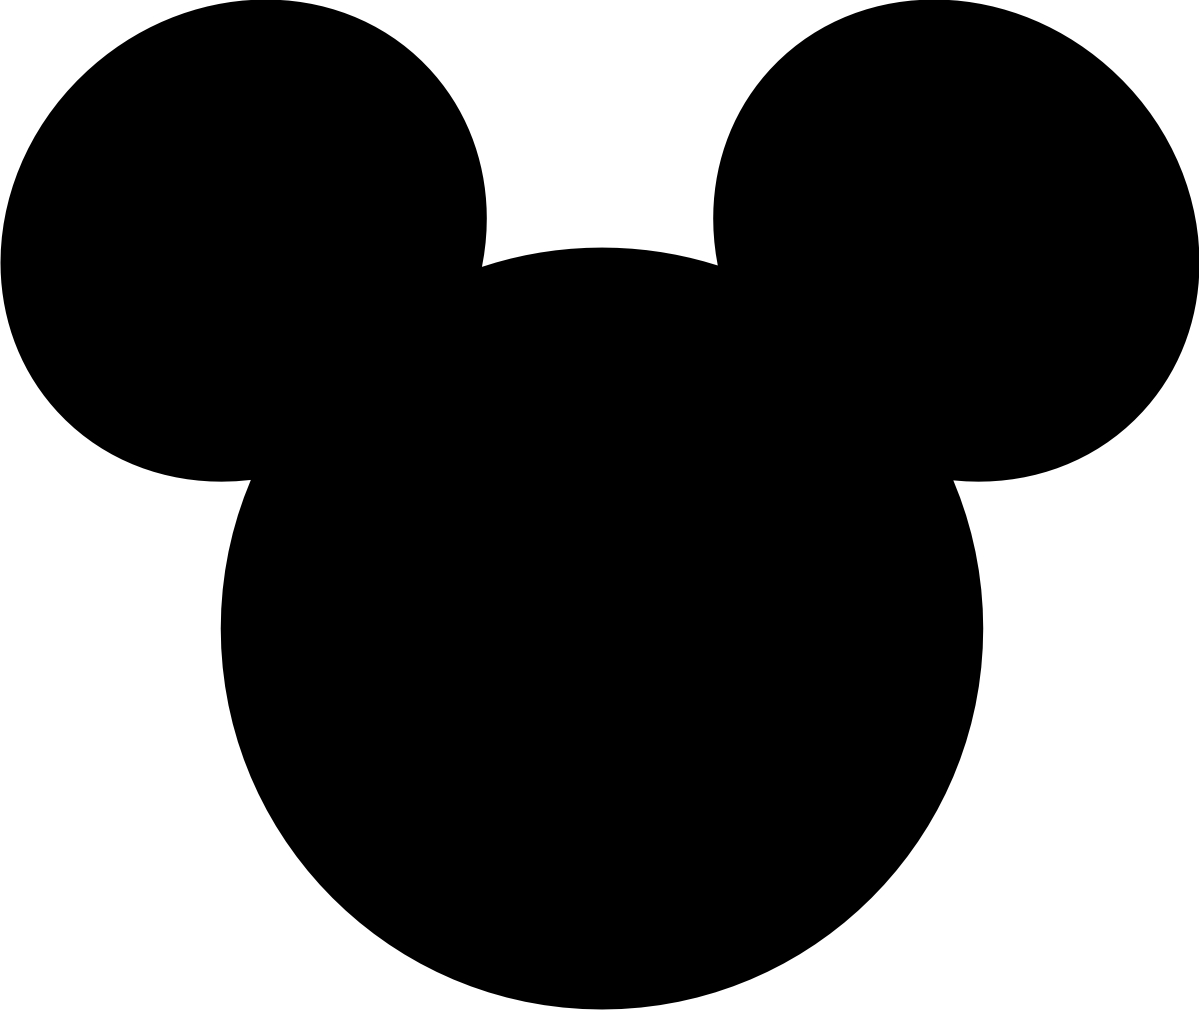 Mickey mouse heads clipart - 